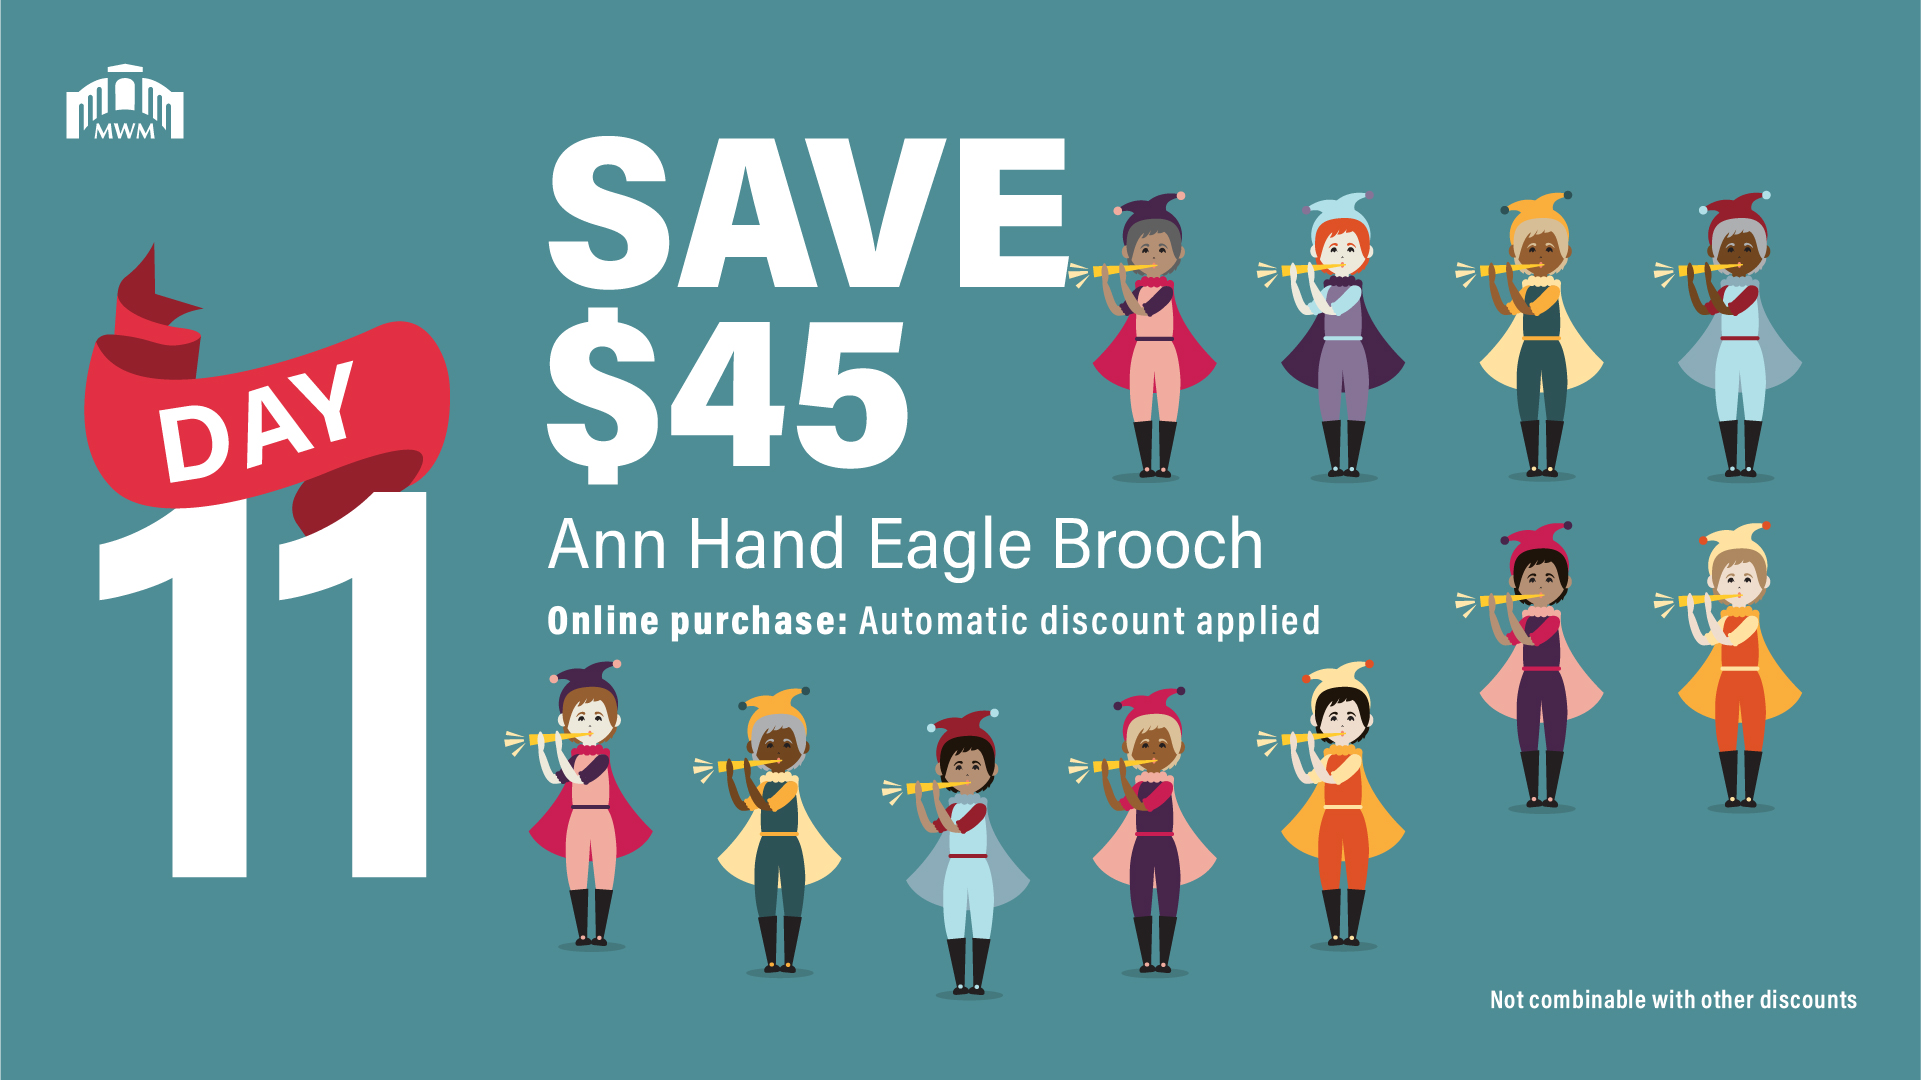 The Twelve Days of Christmas. Day 11 with pipers piping. The words save $45 off Ann Hand Eagle Brooch.